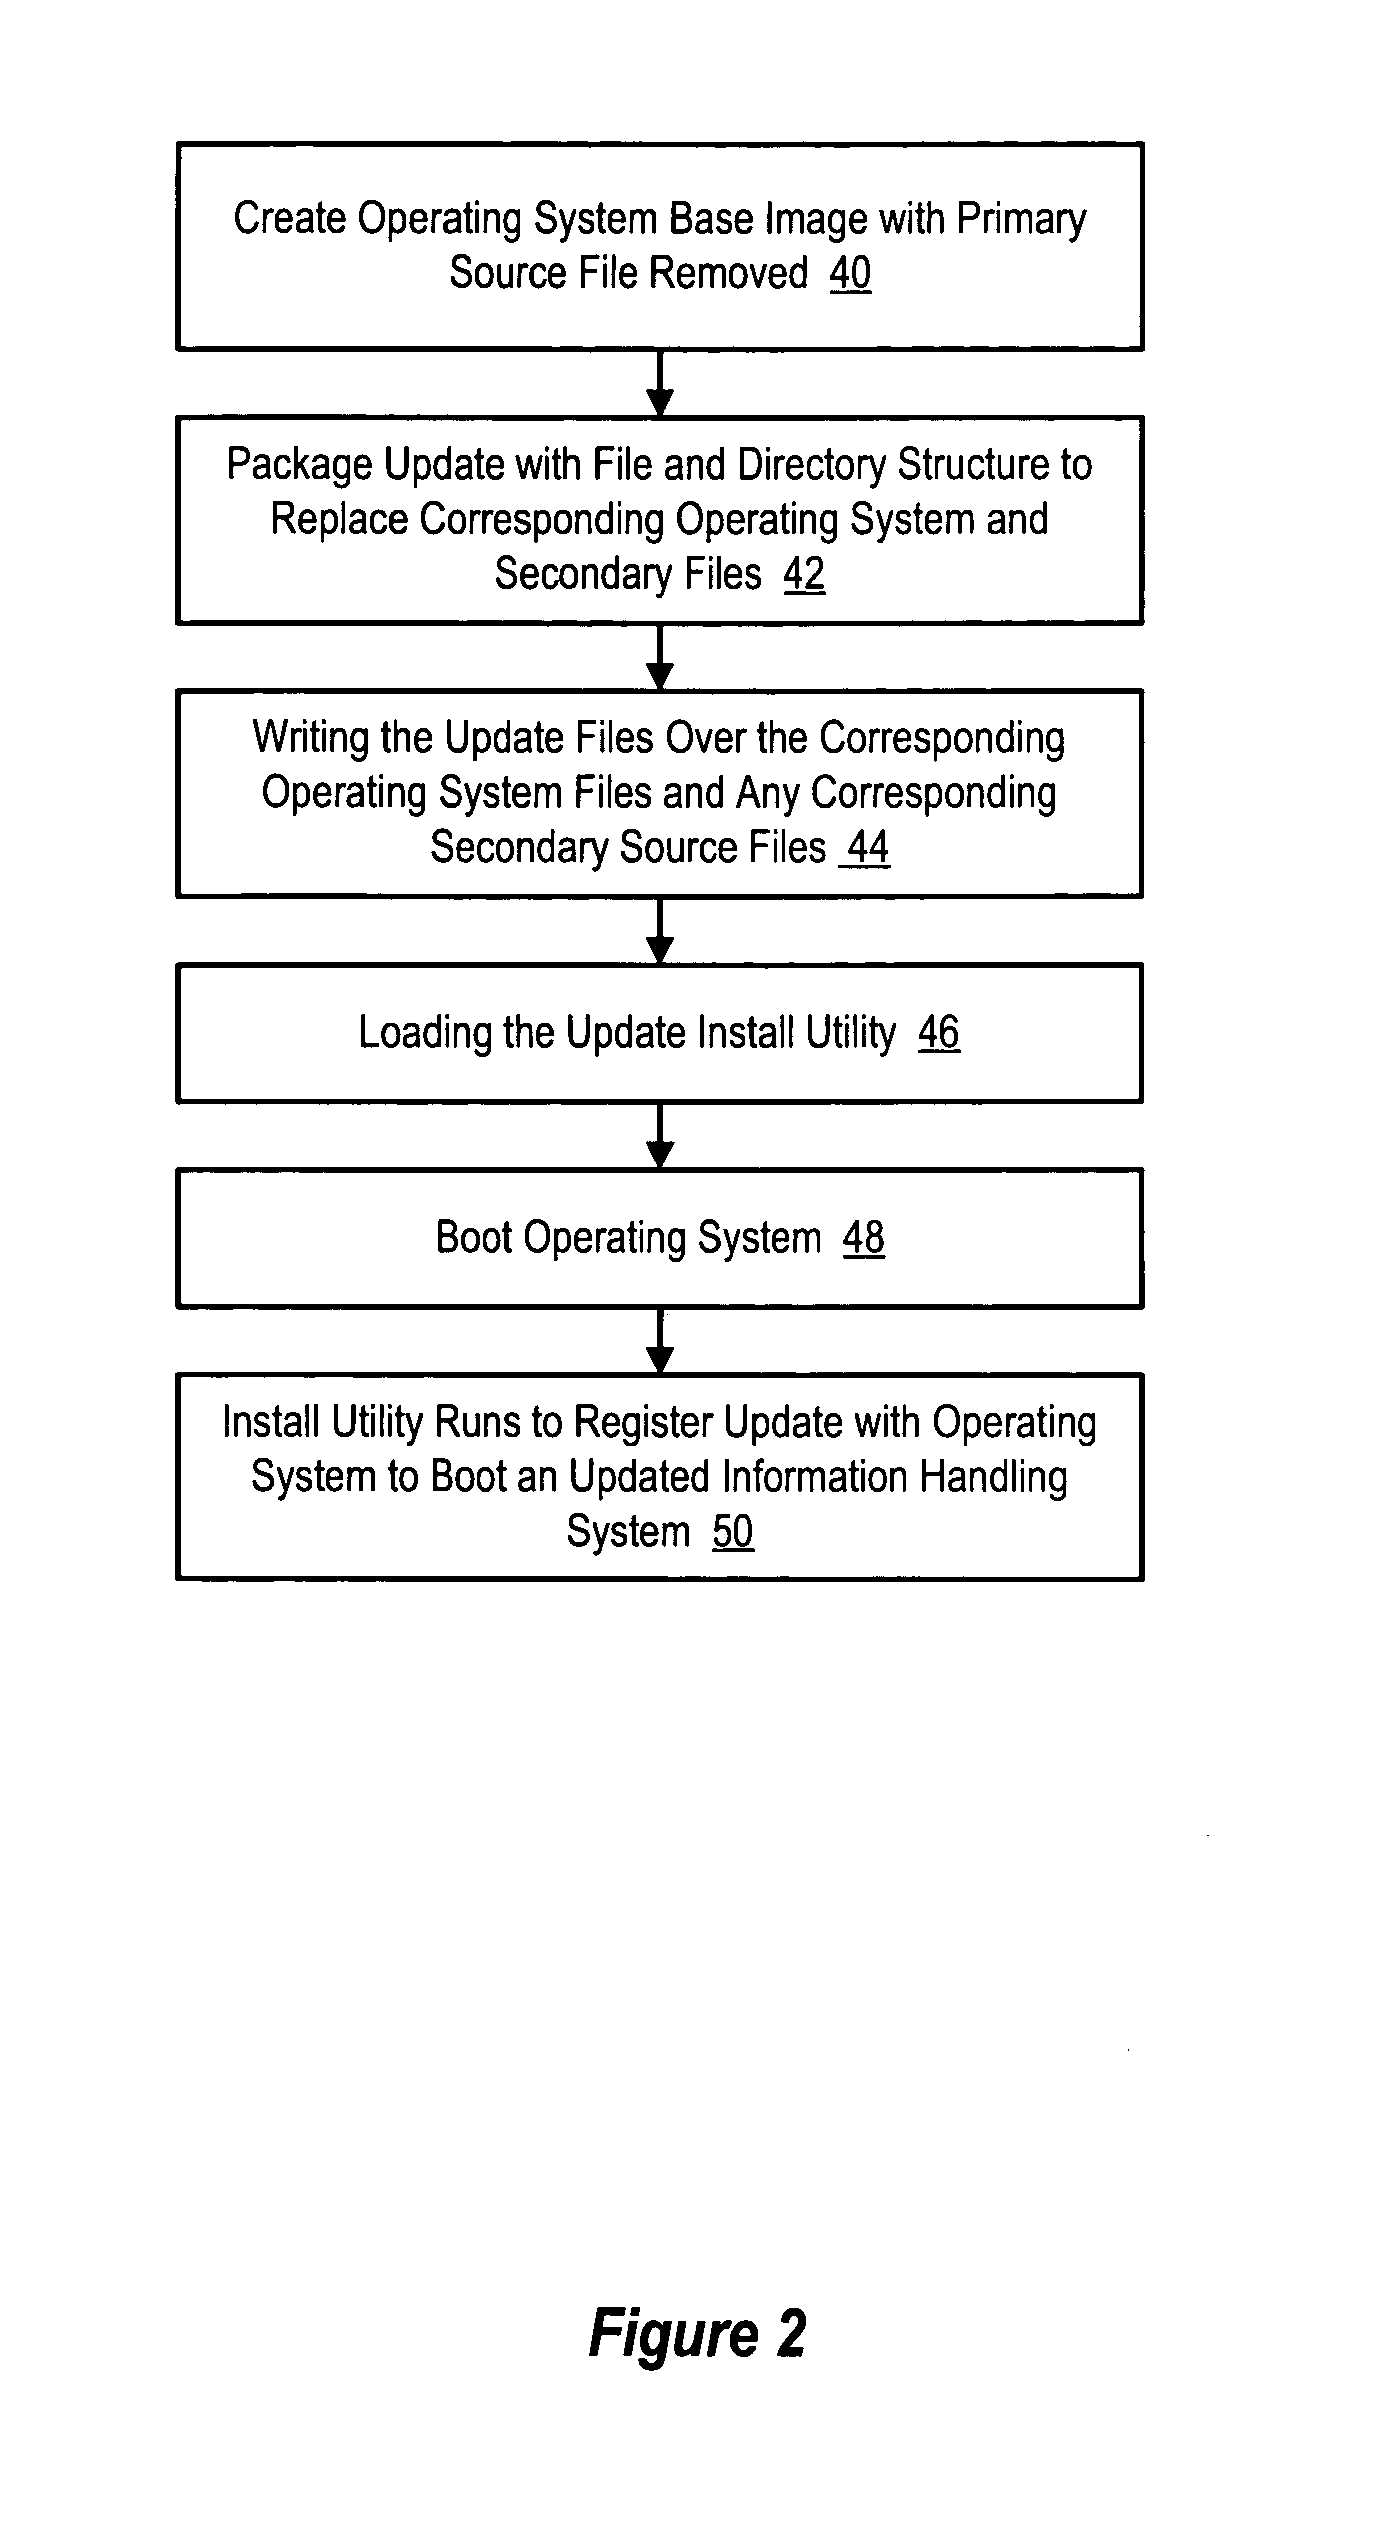 System and method for preintegration of updates to an operating system